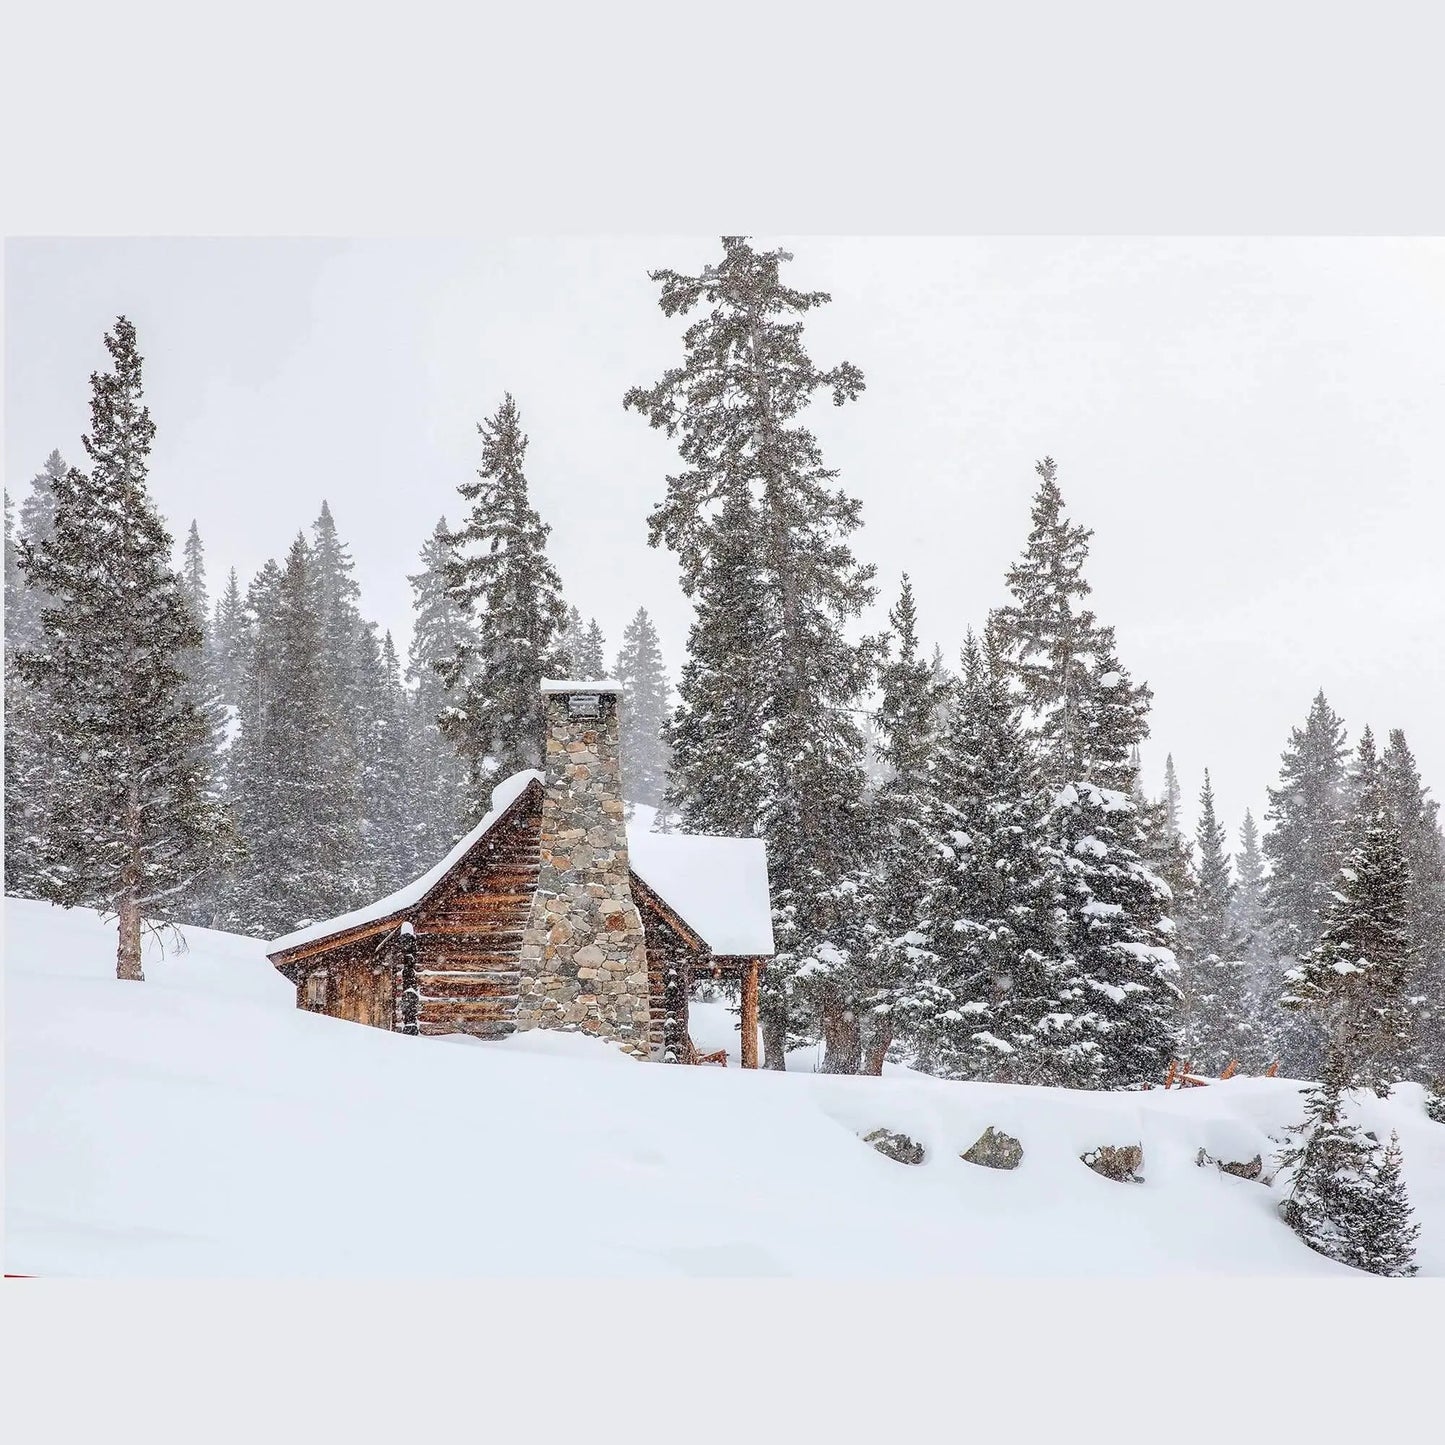 snowy day and rustic cabin captured in colorado